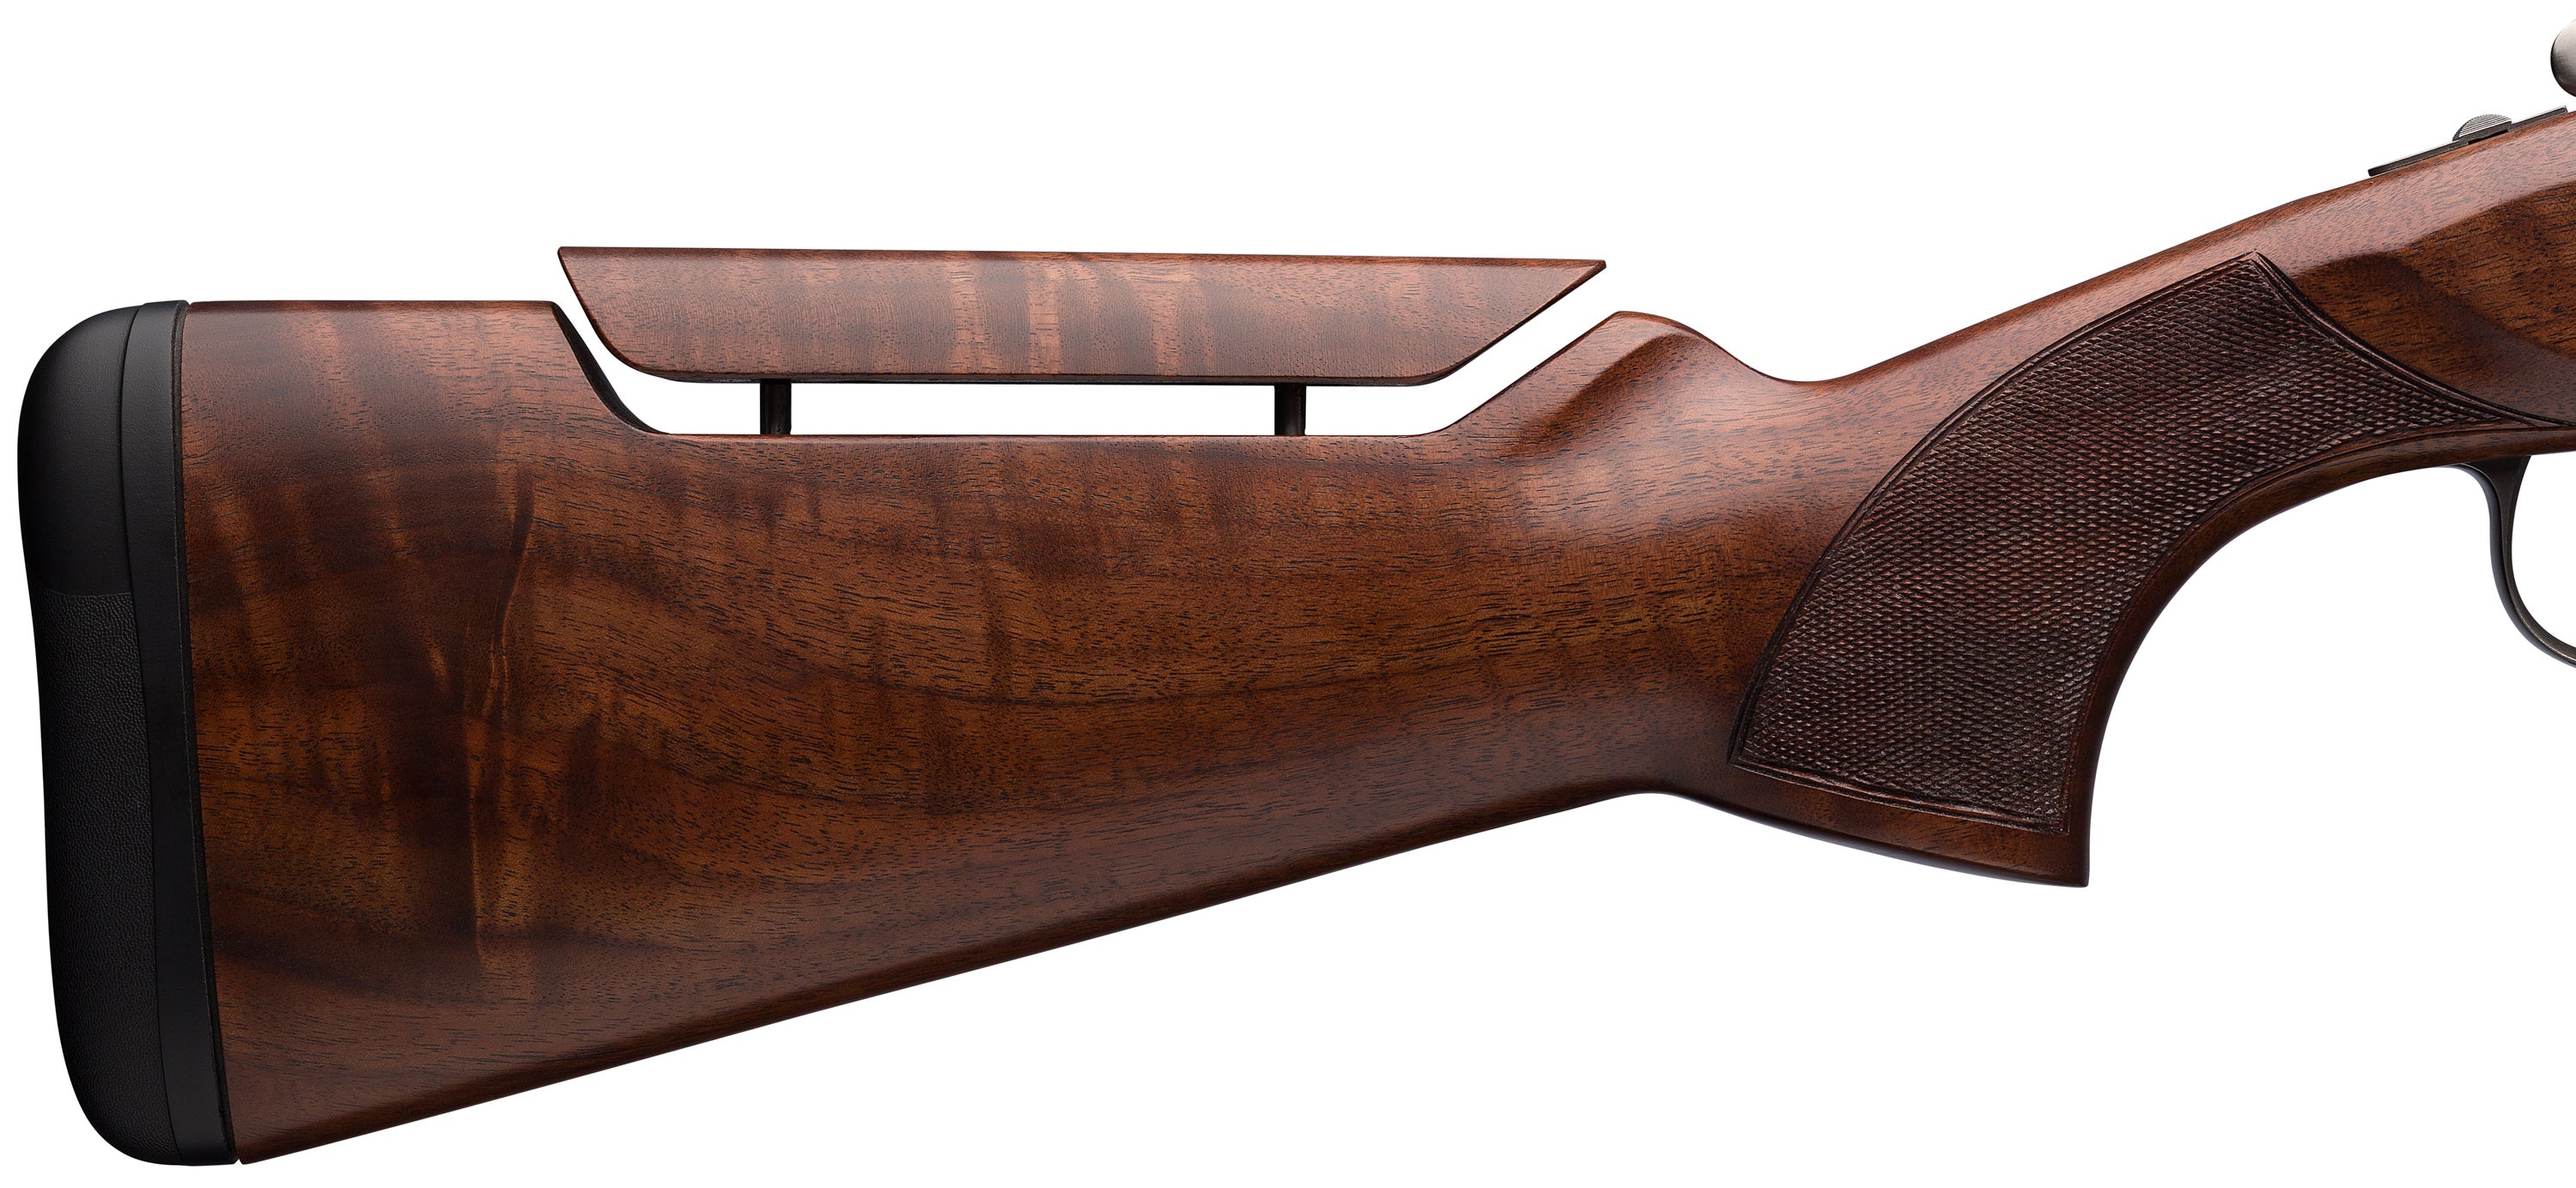 Browning Citori 725 Sporting Shotgun In Stock | Don't Miss Out, Buy Now! - Alligator Arms